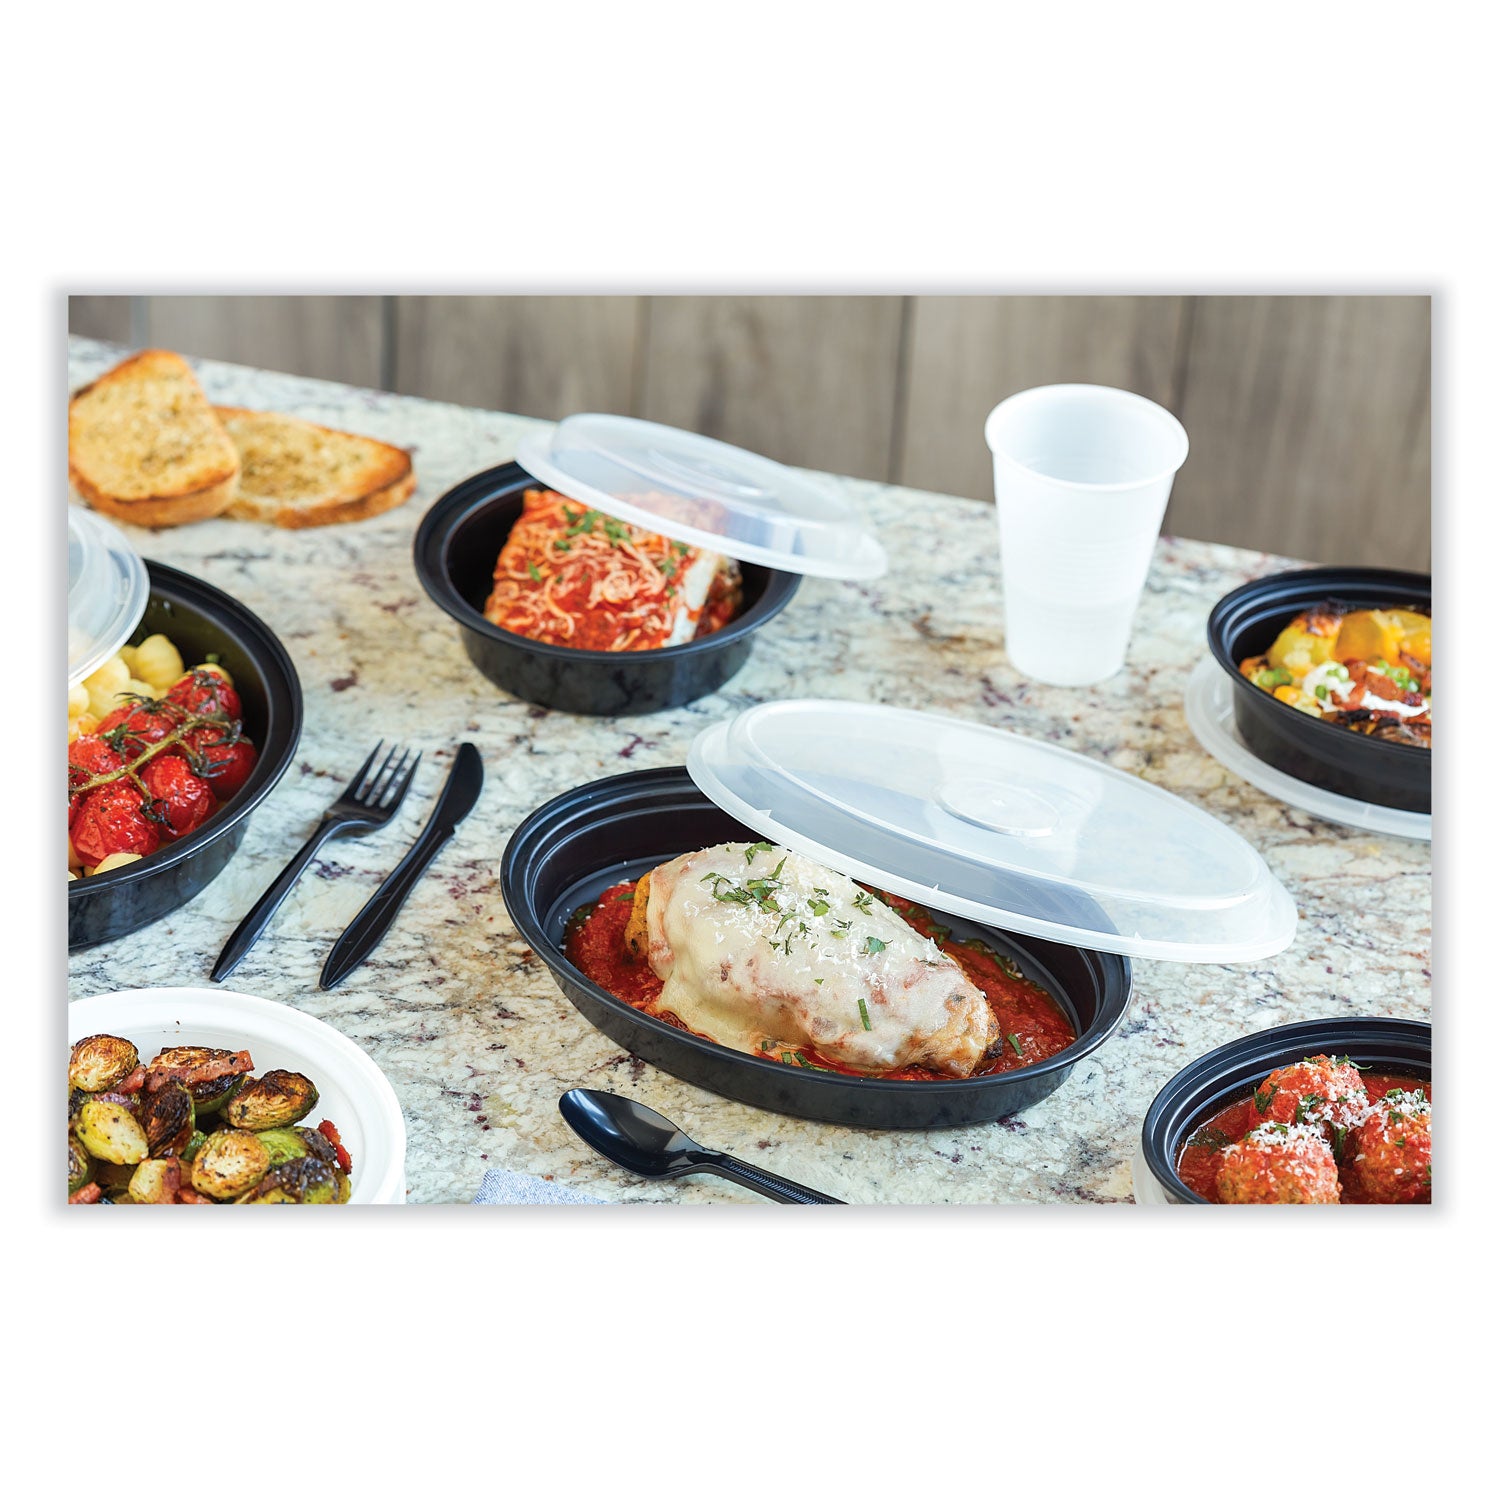 newspring-versatainer-microwavable-containers-oval-24-oz-91-x-67-x-145-black-clear-plastic-150-carton_pctoc24b - 4